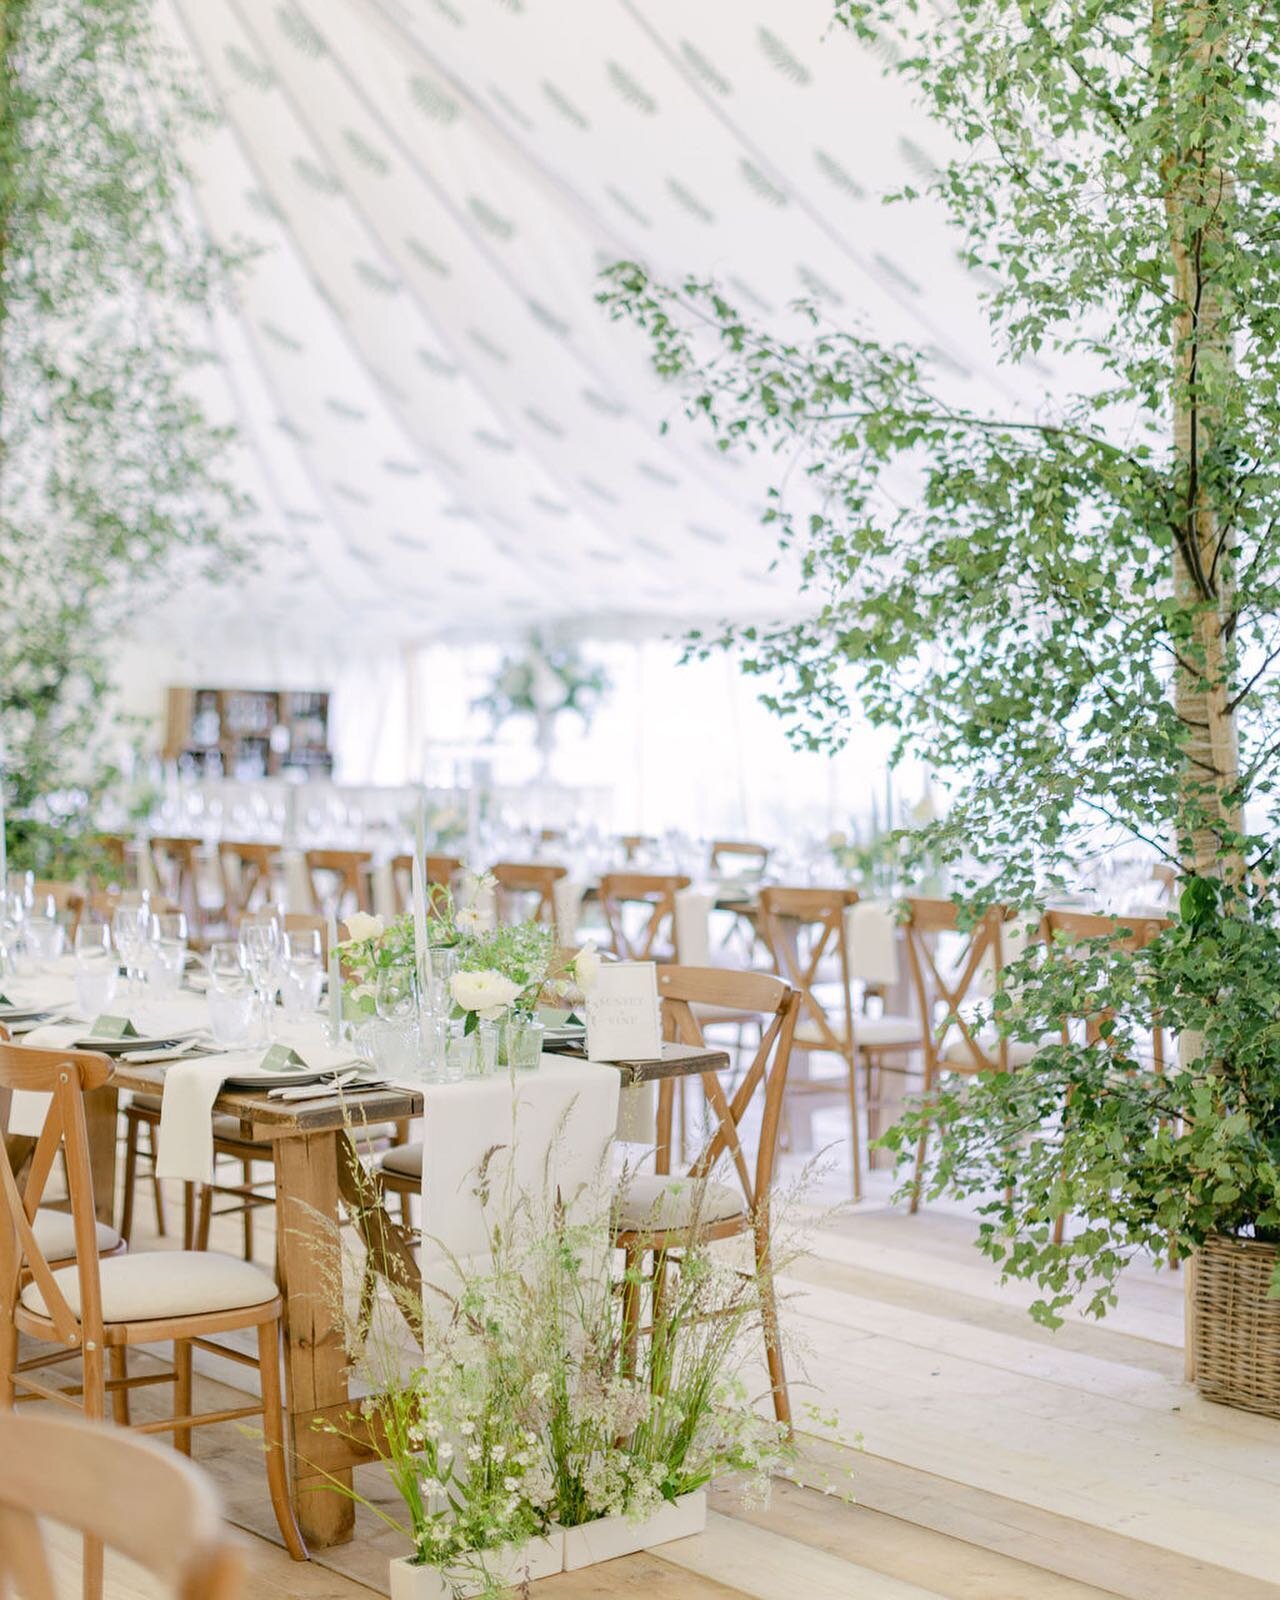 Fresh and green was theme for this June Marquee. Birch trees up the tent poles and meadow arrangements full of grasses and ammi. It truly felt like the outside had come in. 

@imogenxiana 
@lpmbohemia 
@theridgewaybarns 

#weddingflowers #bridalflowe